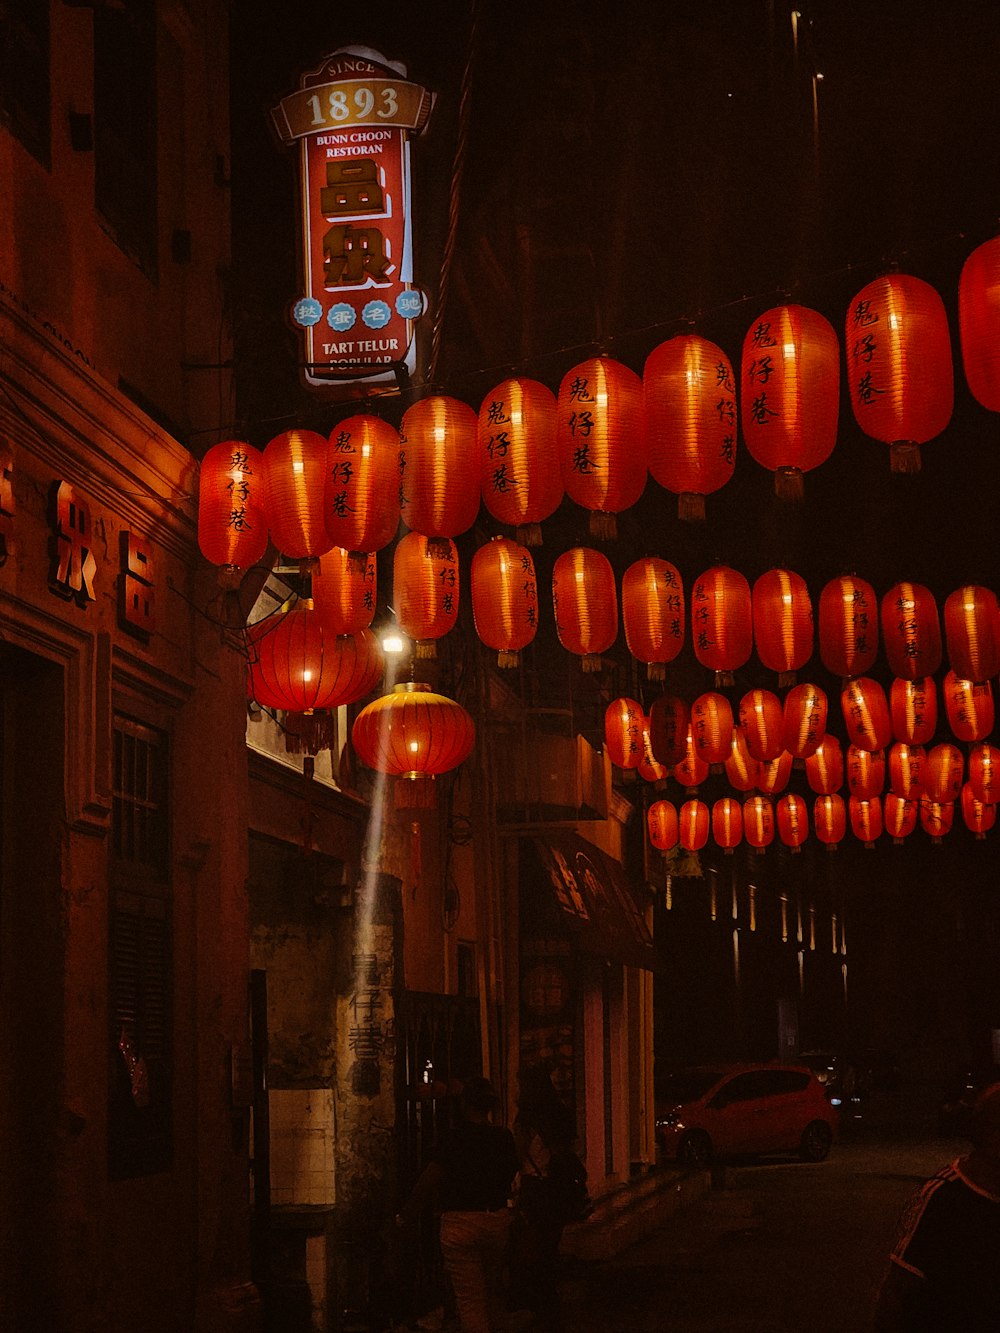 a group of red lanterns hanging from the side of a building